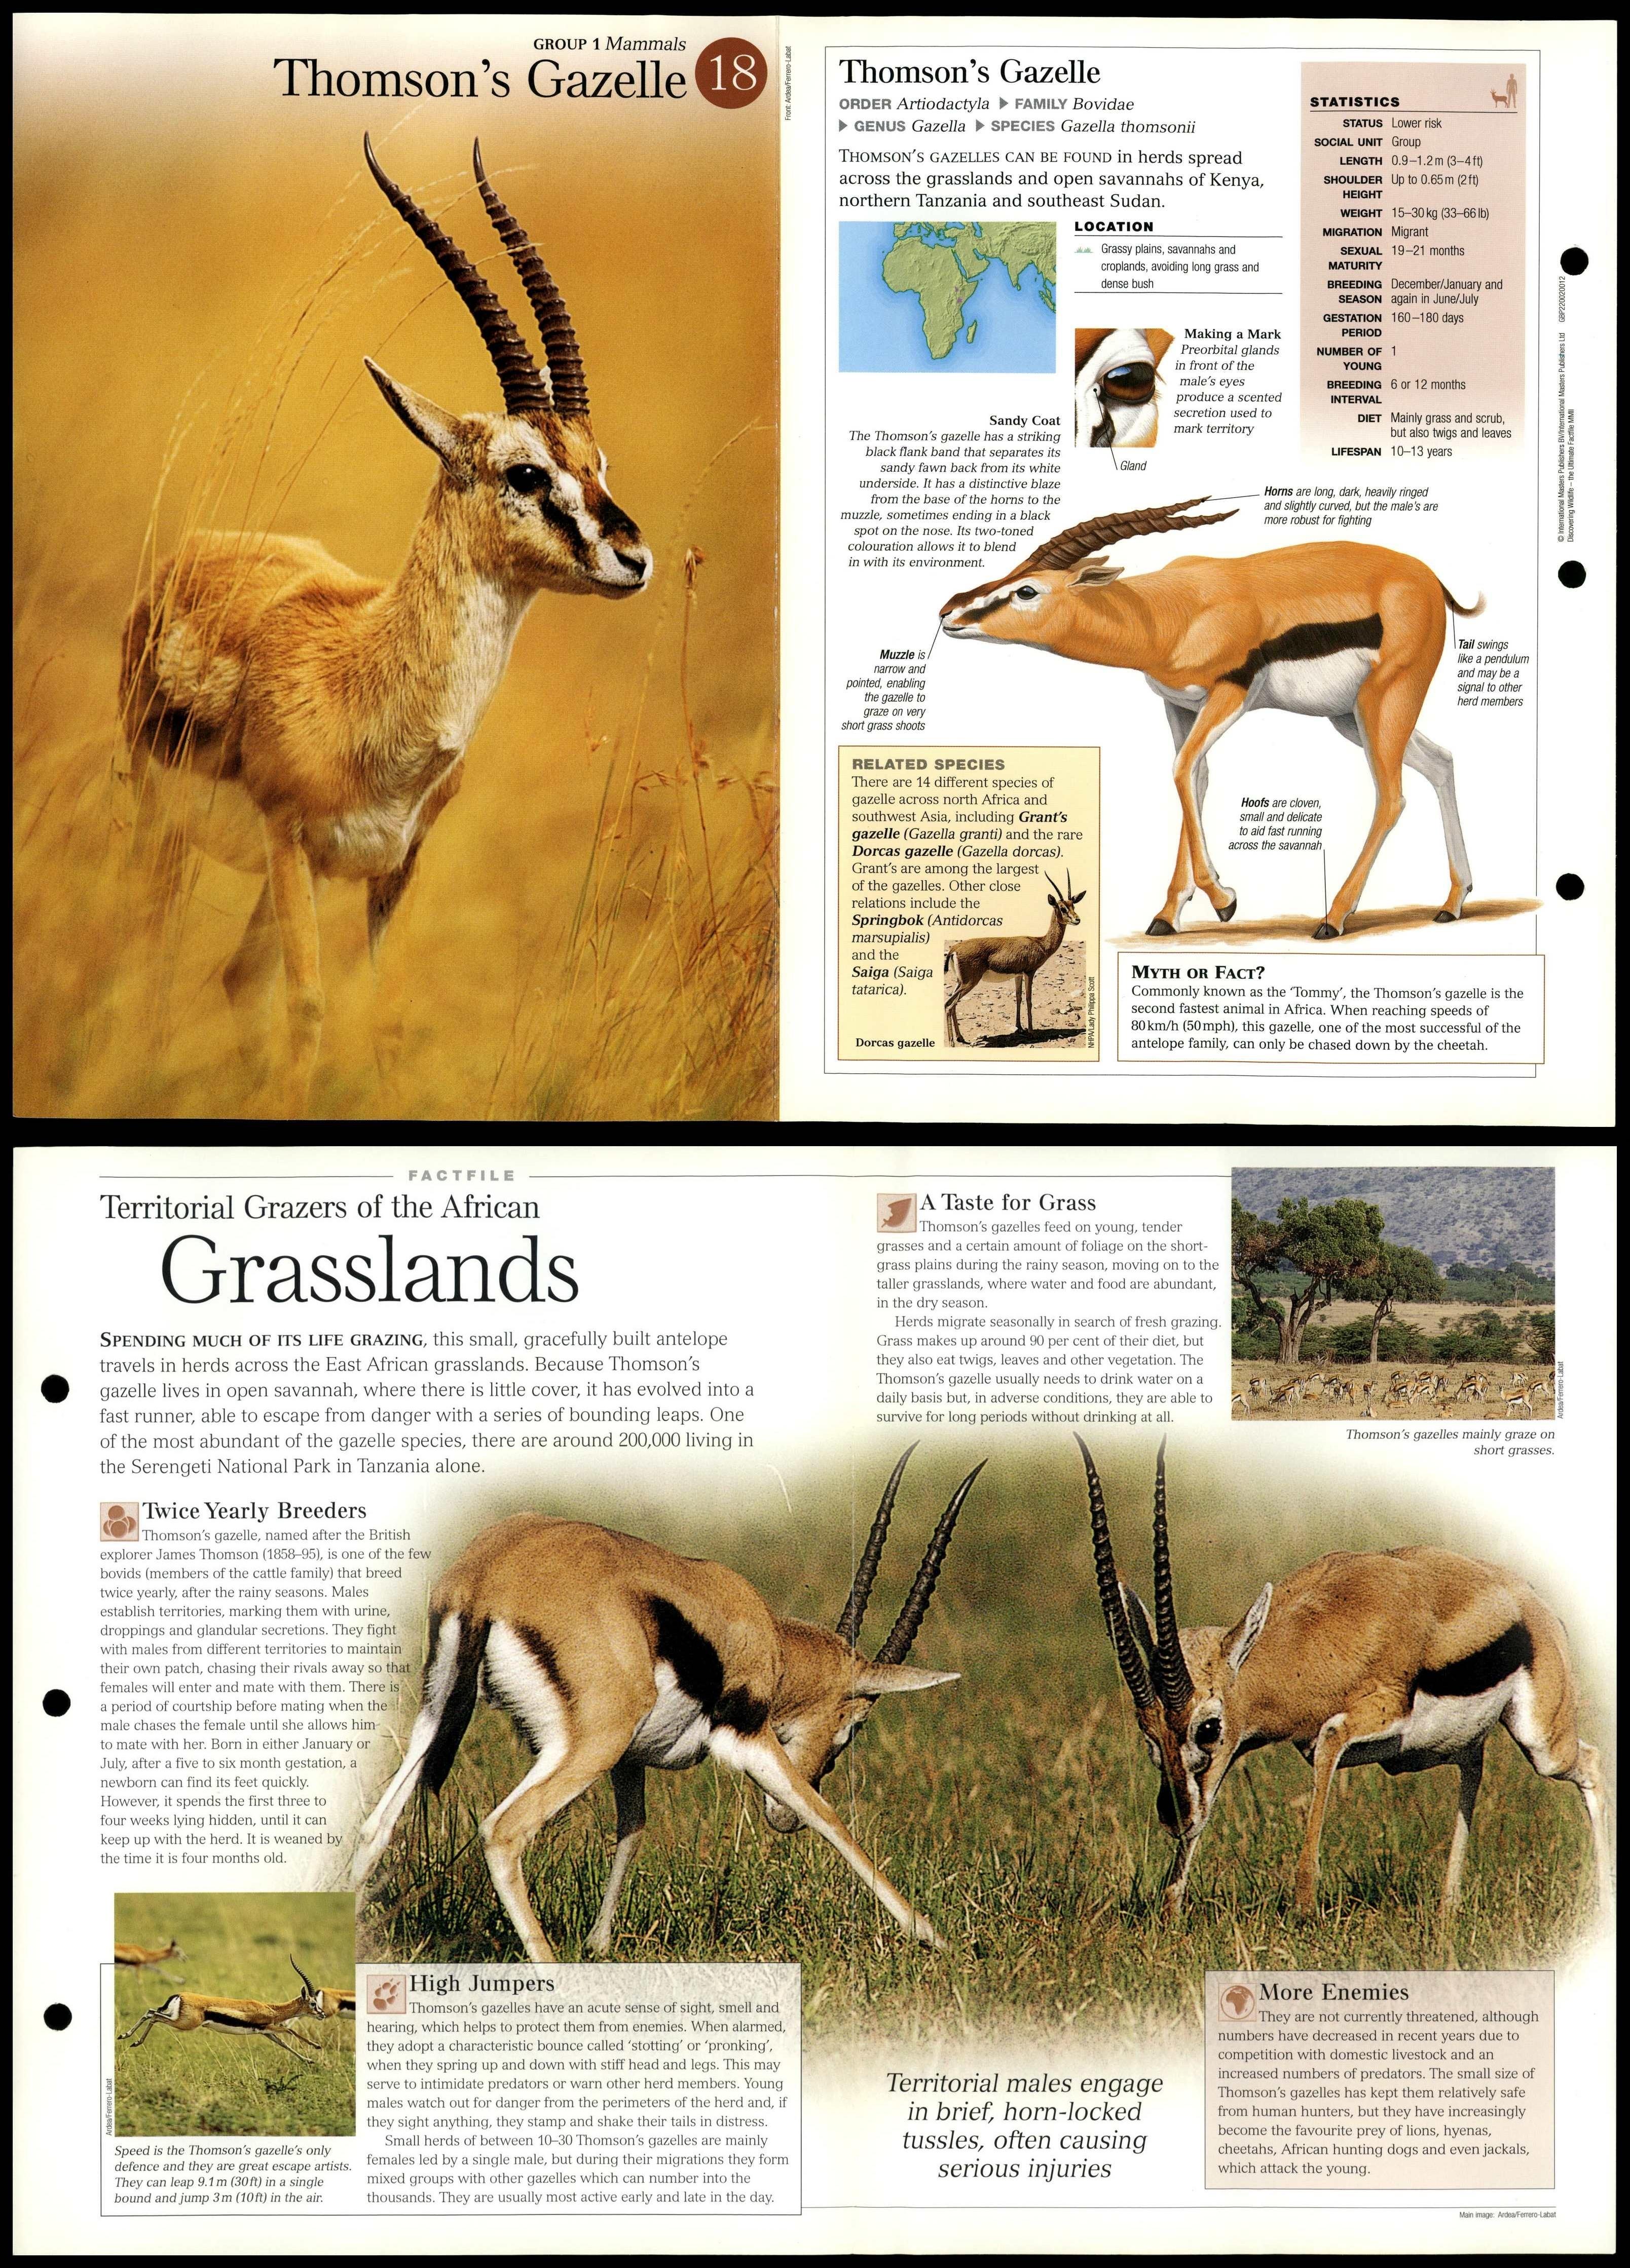 Thomson's Gazelle #18 Mammals - Discovering Wildlife Fact File Fold-Out Card